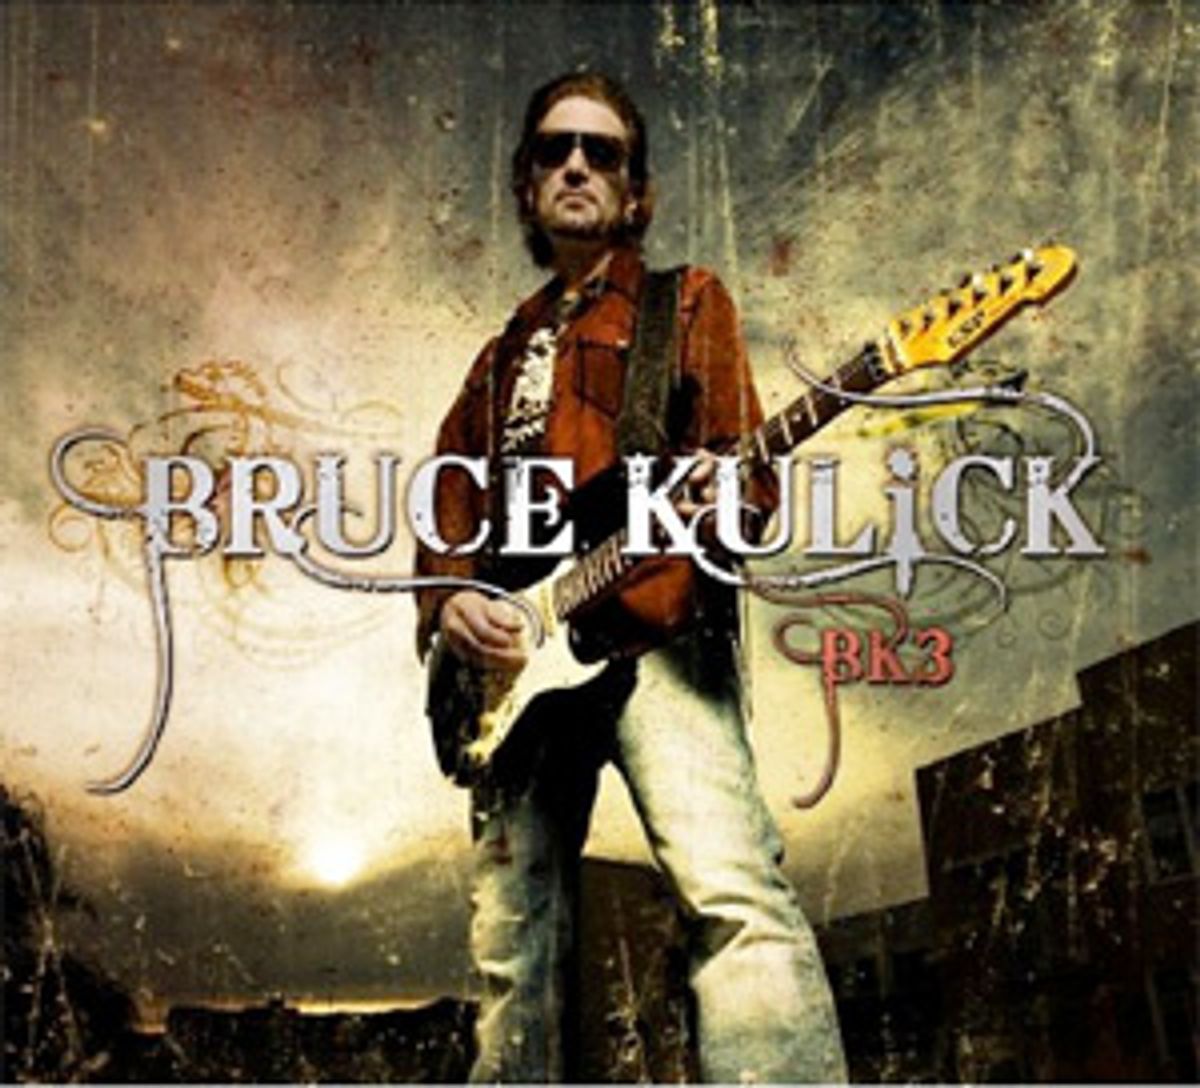 Interview: Bruce Kulick Discusses Gear and Recording for BK3